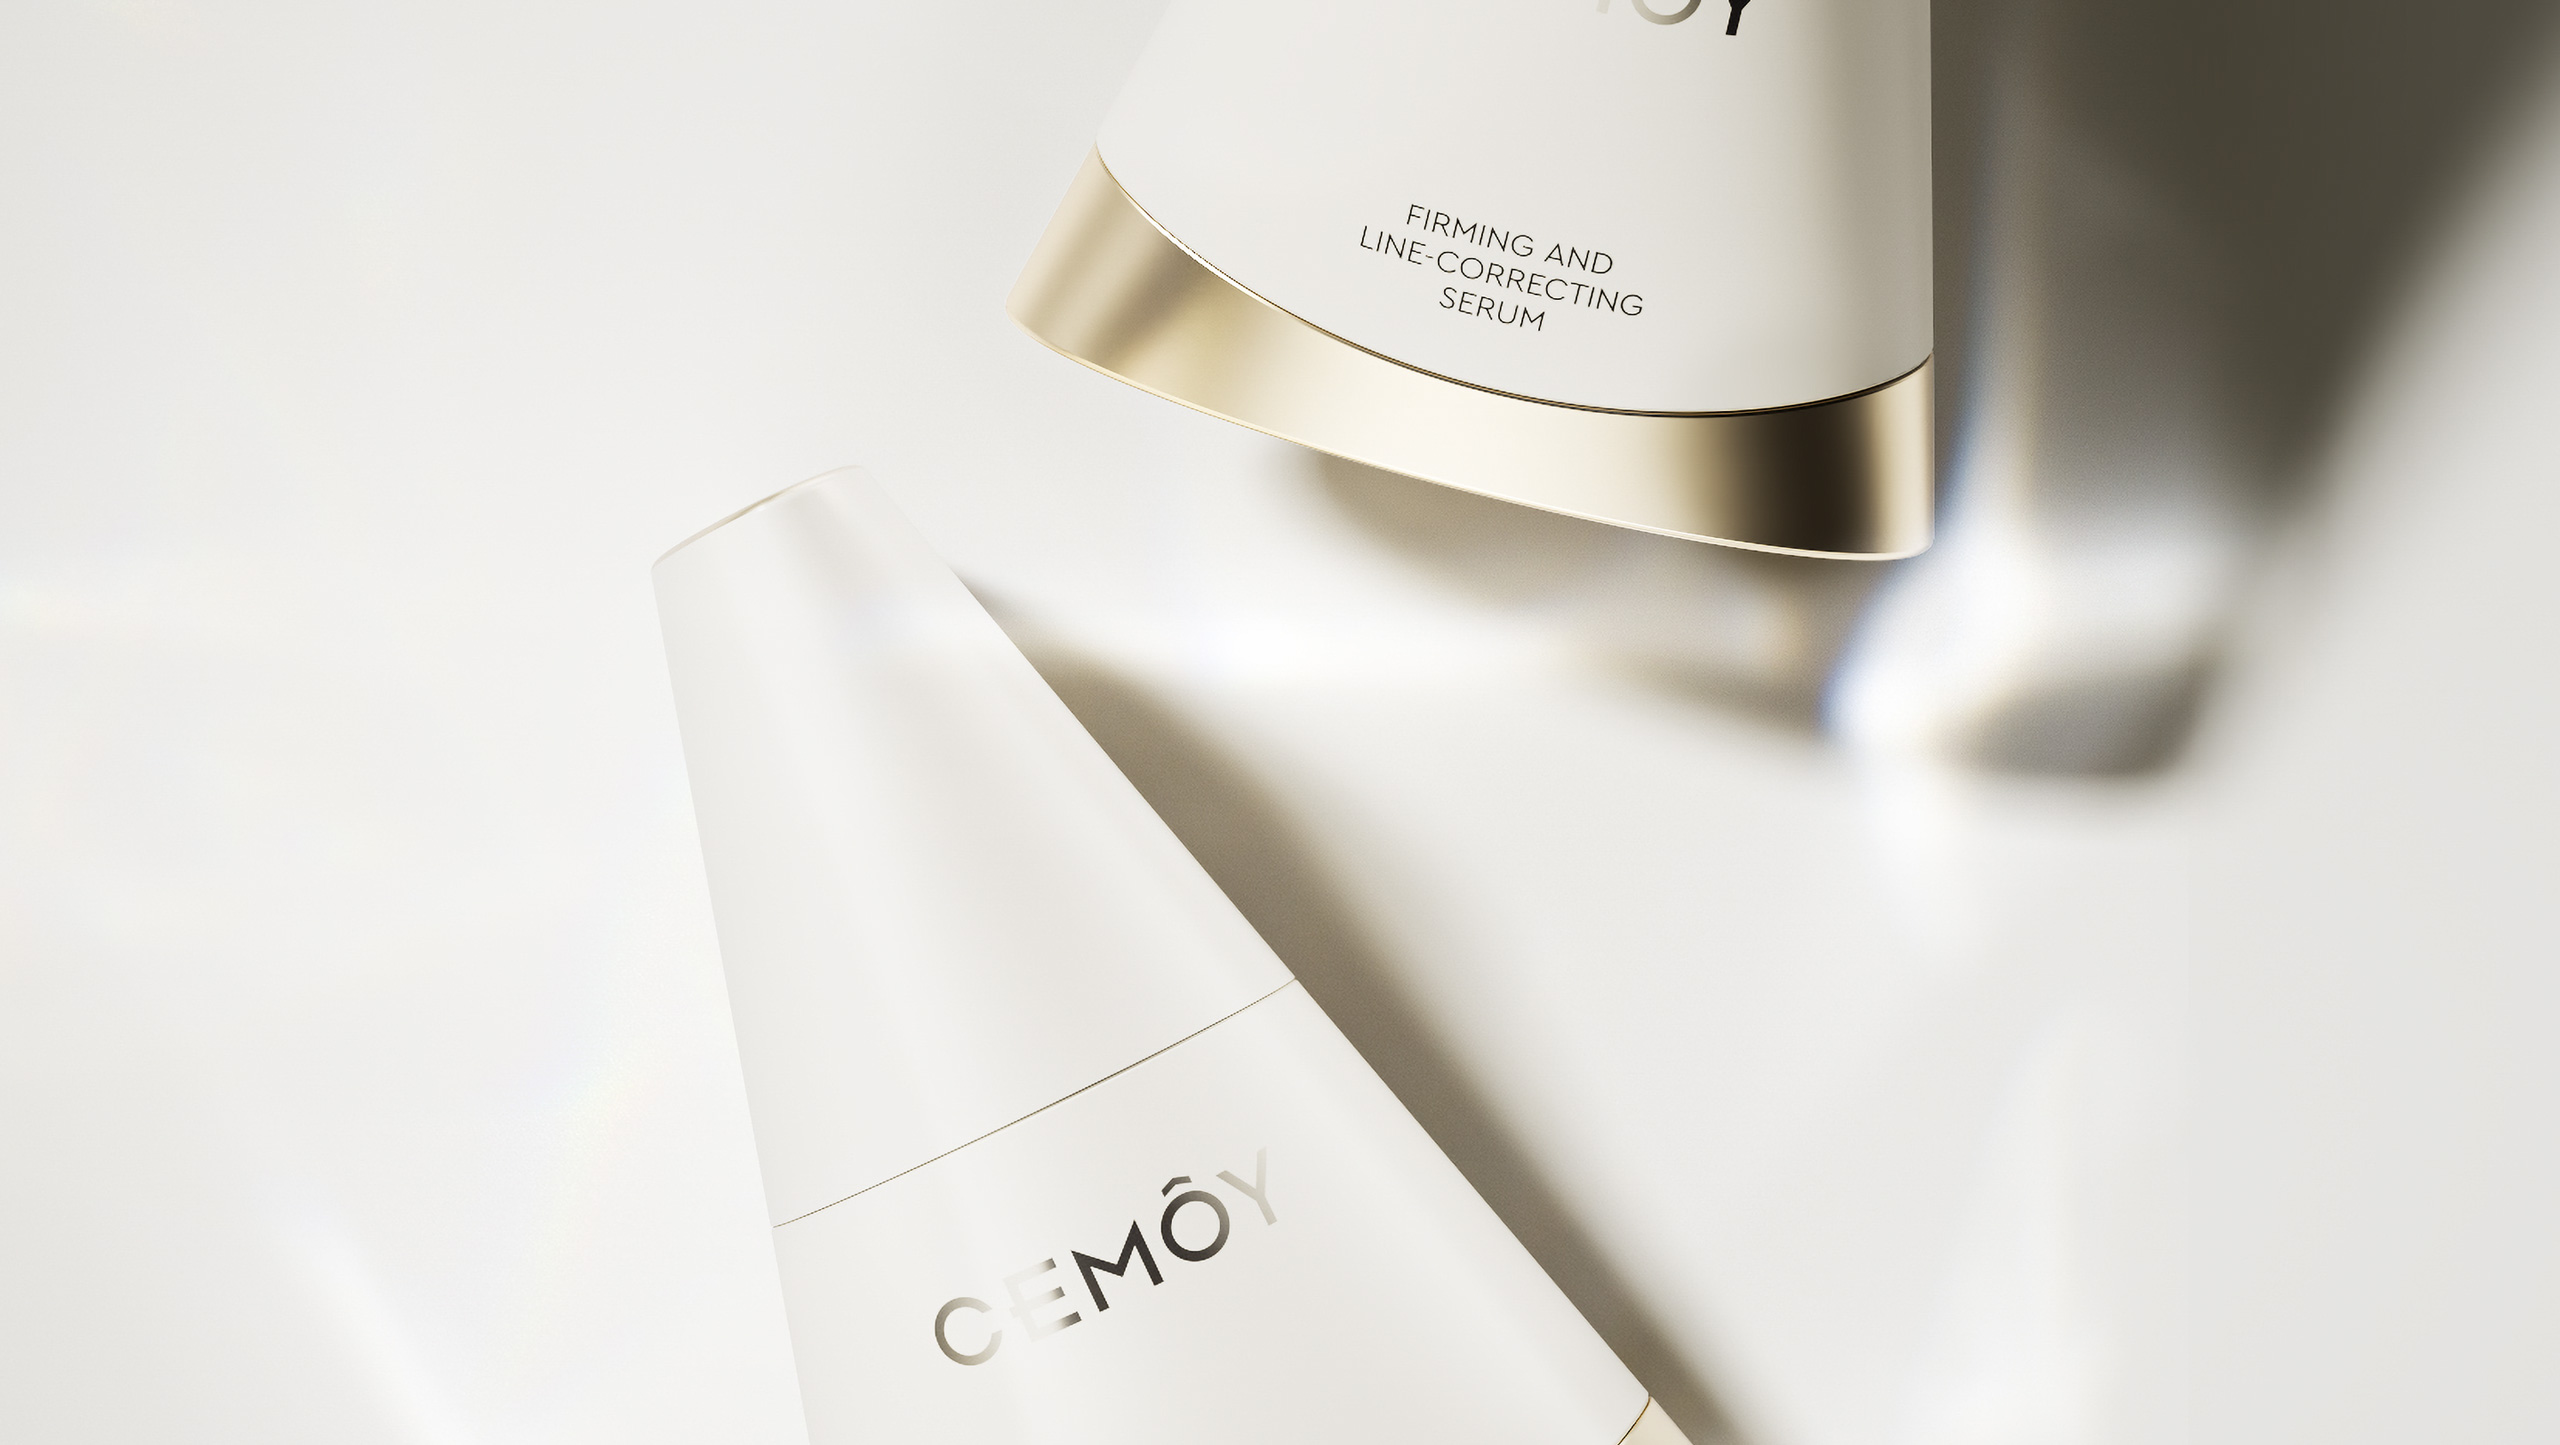 //cemoy.com/uploads/2024/01/products/firming-and-line-correcting-serum/block-img-4.jpg